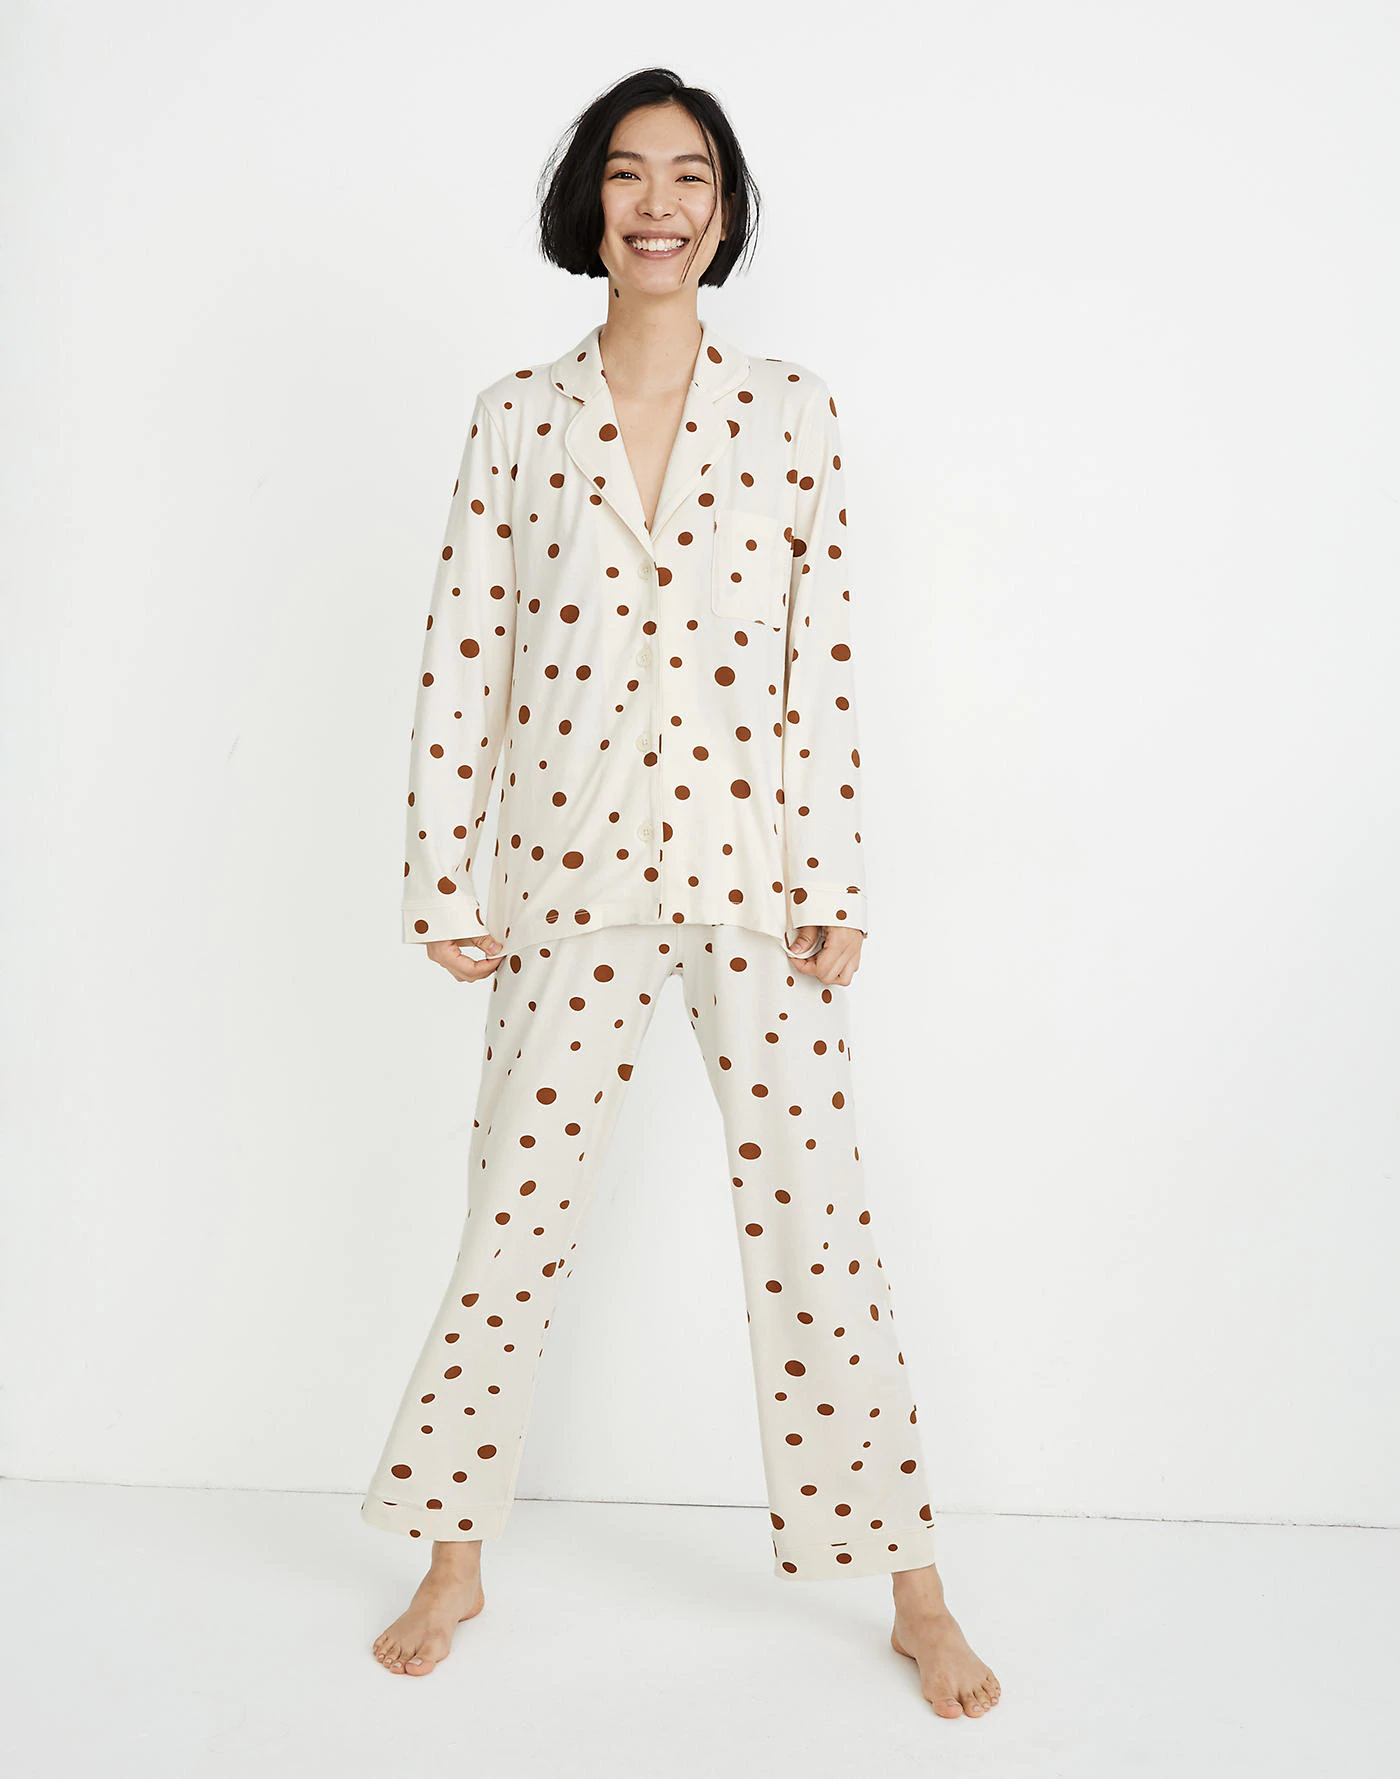 Madewell + Knit Bedtime Pajama Top in Dot